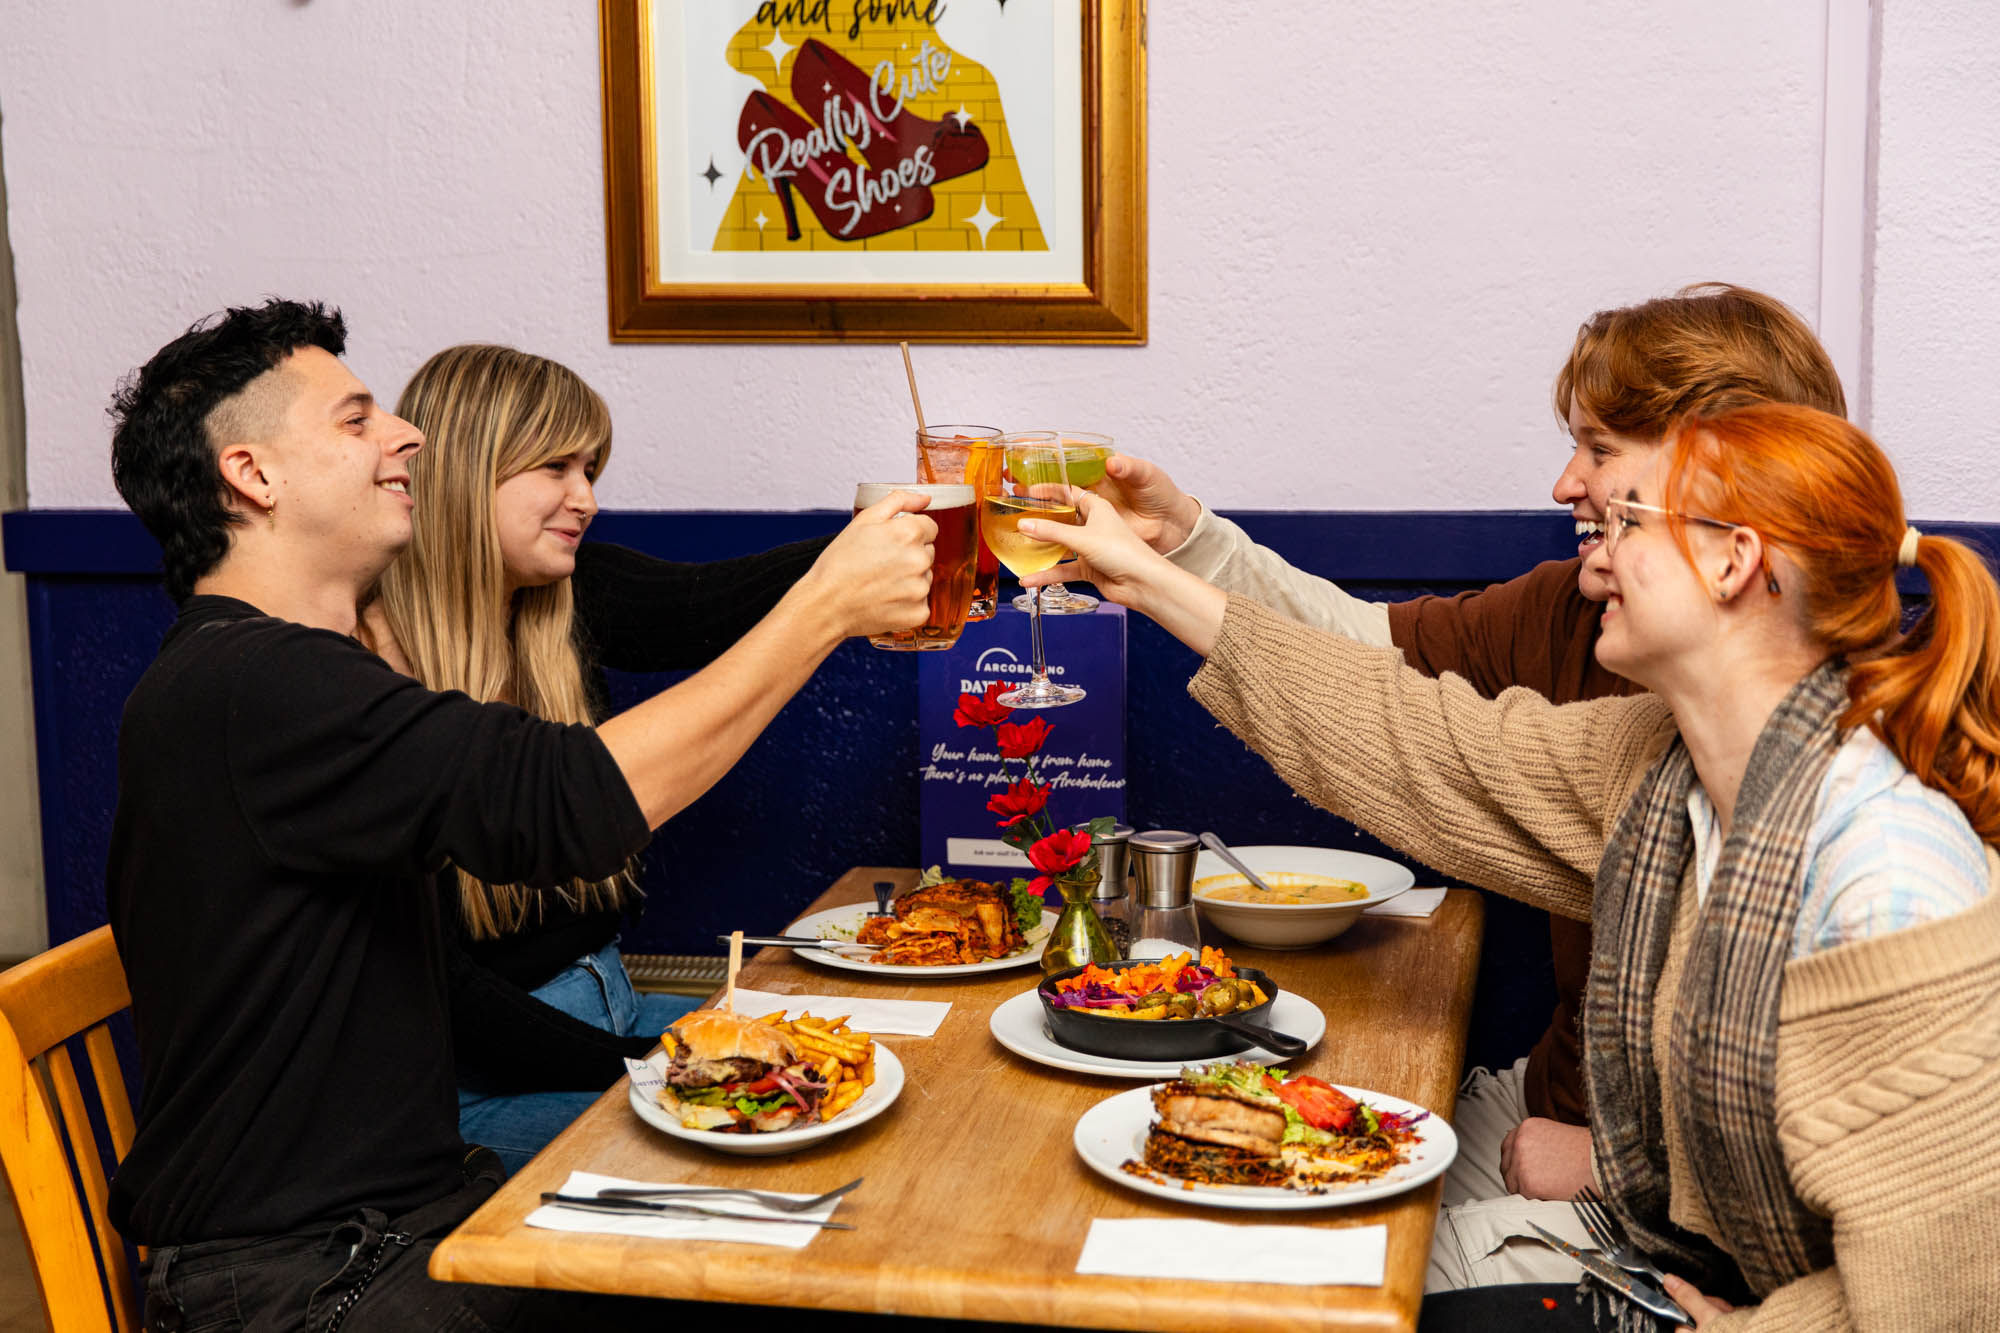 People cheersing their drinks at a table with food.